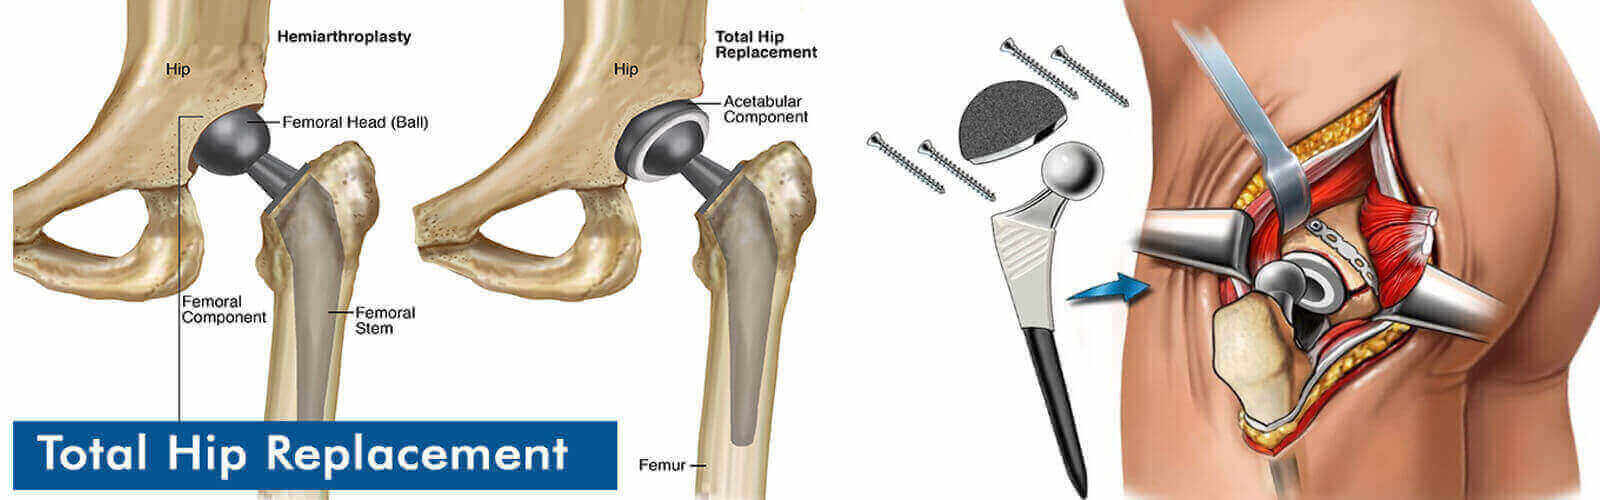 Hip Replacement Surgery Or Hip Resurfacing in Turkey